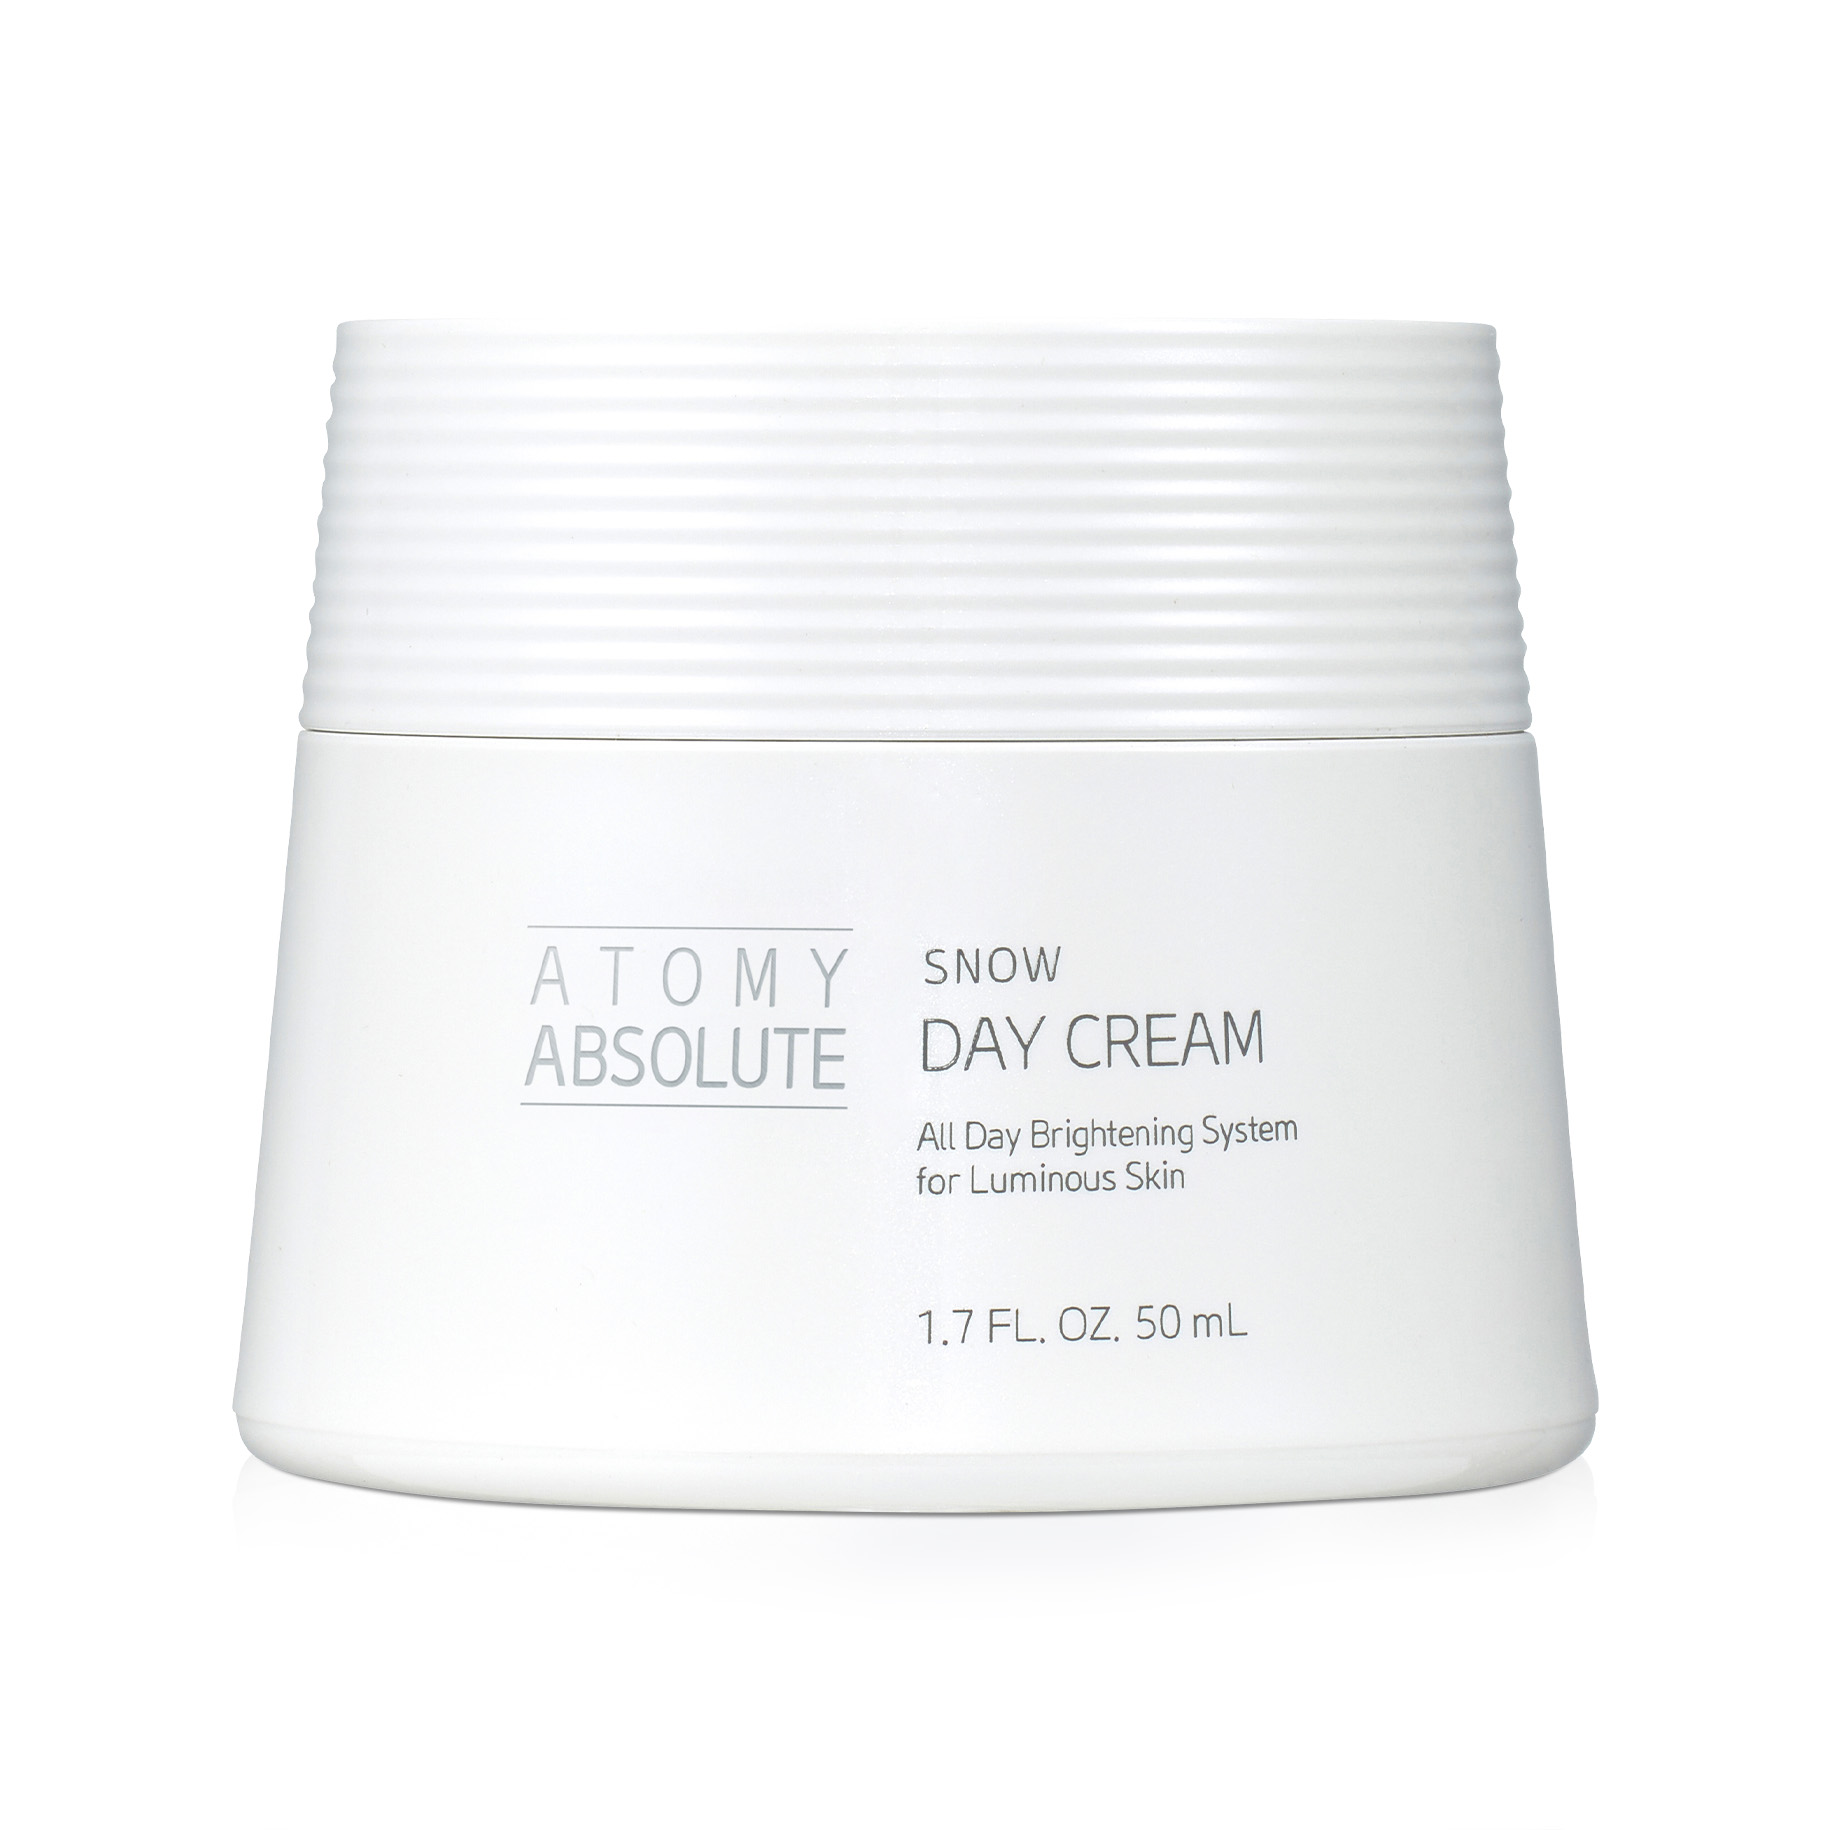 Atomy Absolute Snow Day Cream | Atomy Colombia